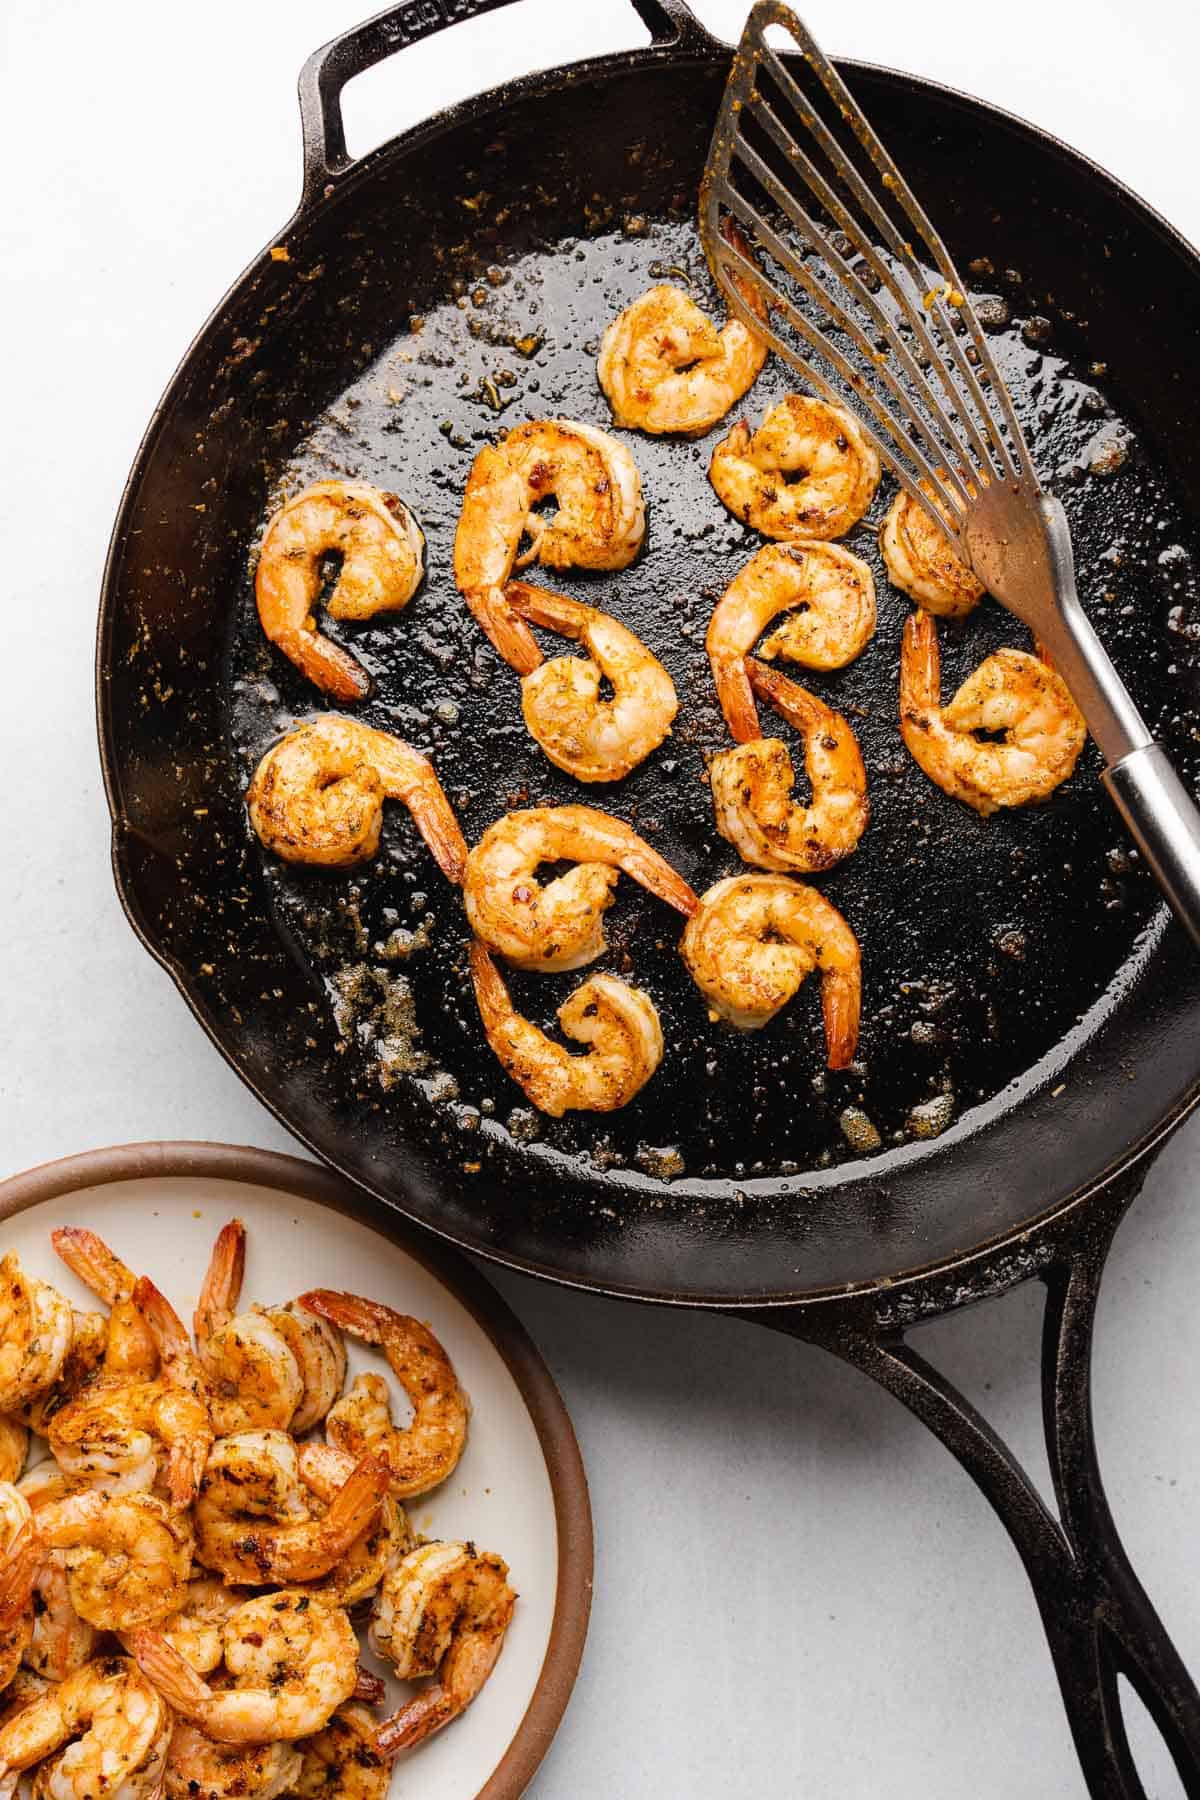 Searing shrimp in a cast iron skillet